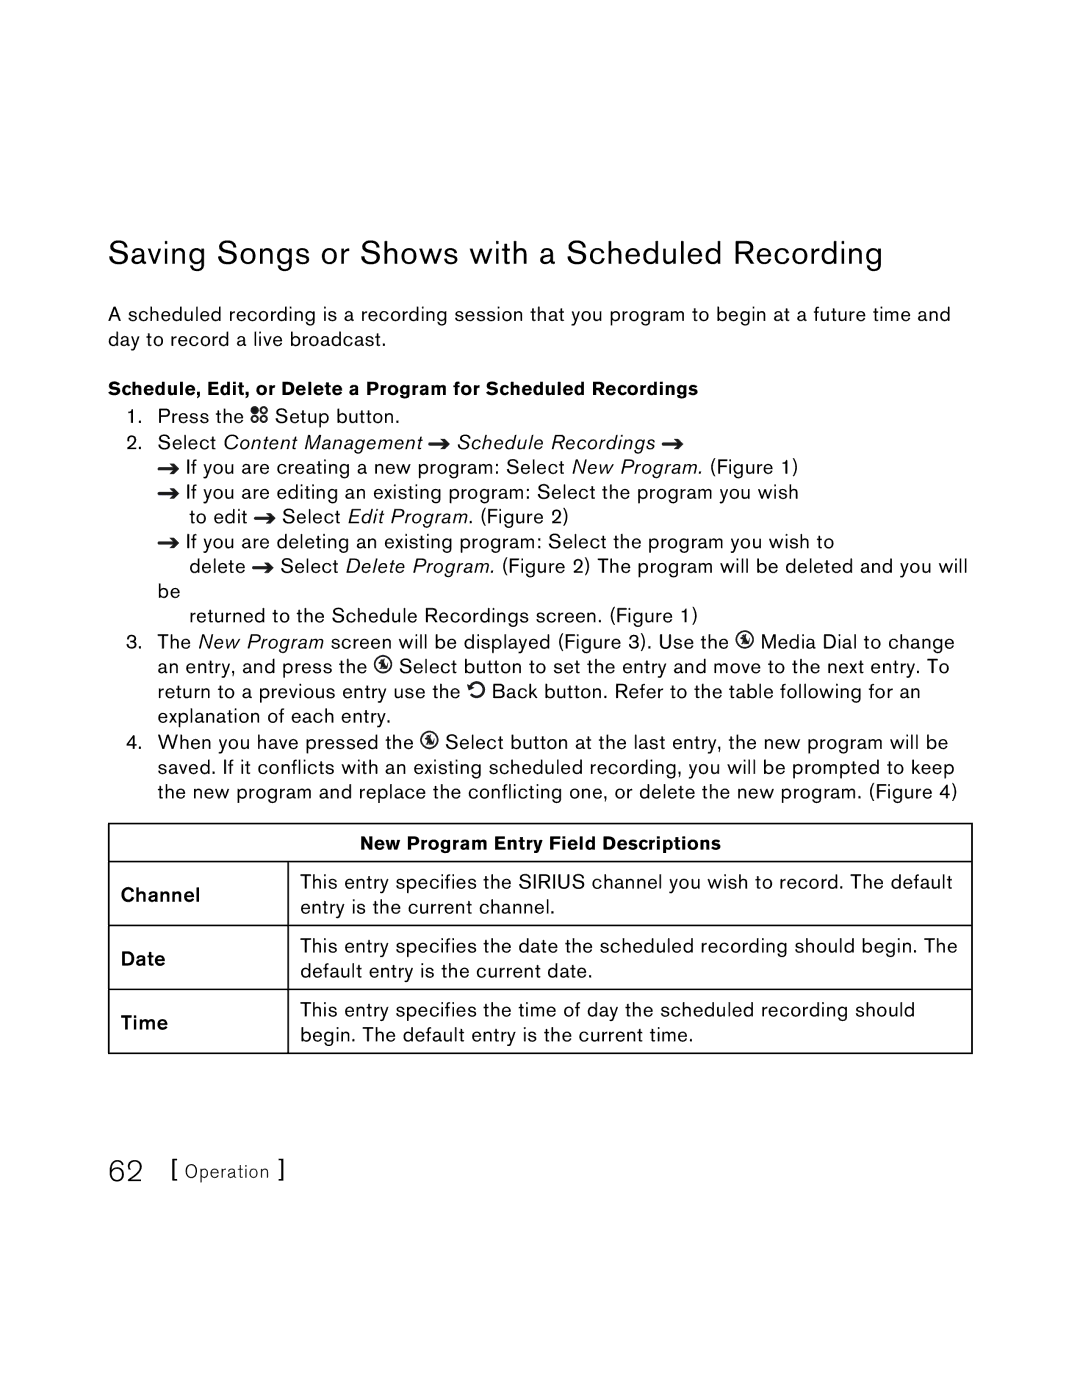 Sirius Satellite Radio S50 Saving Songs or Shows with a Scheduled Recording, Select Content Management Schedule Recordings 